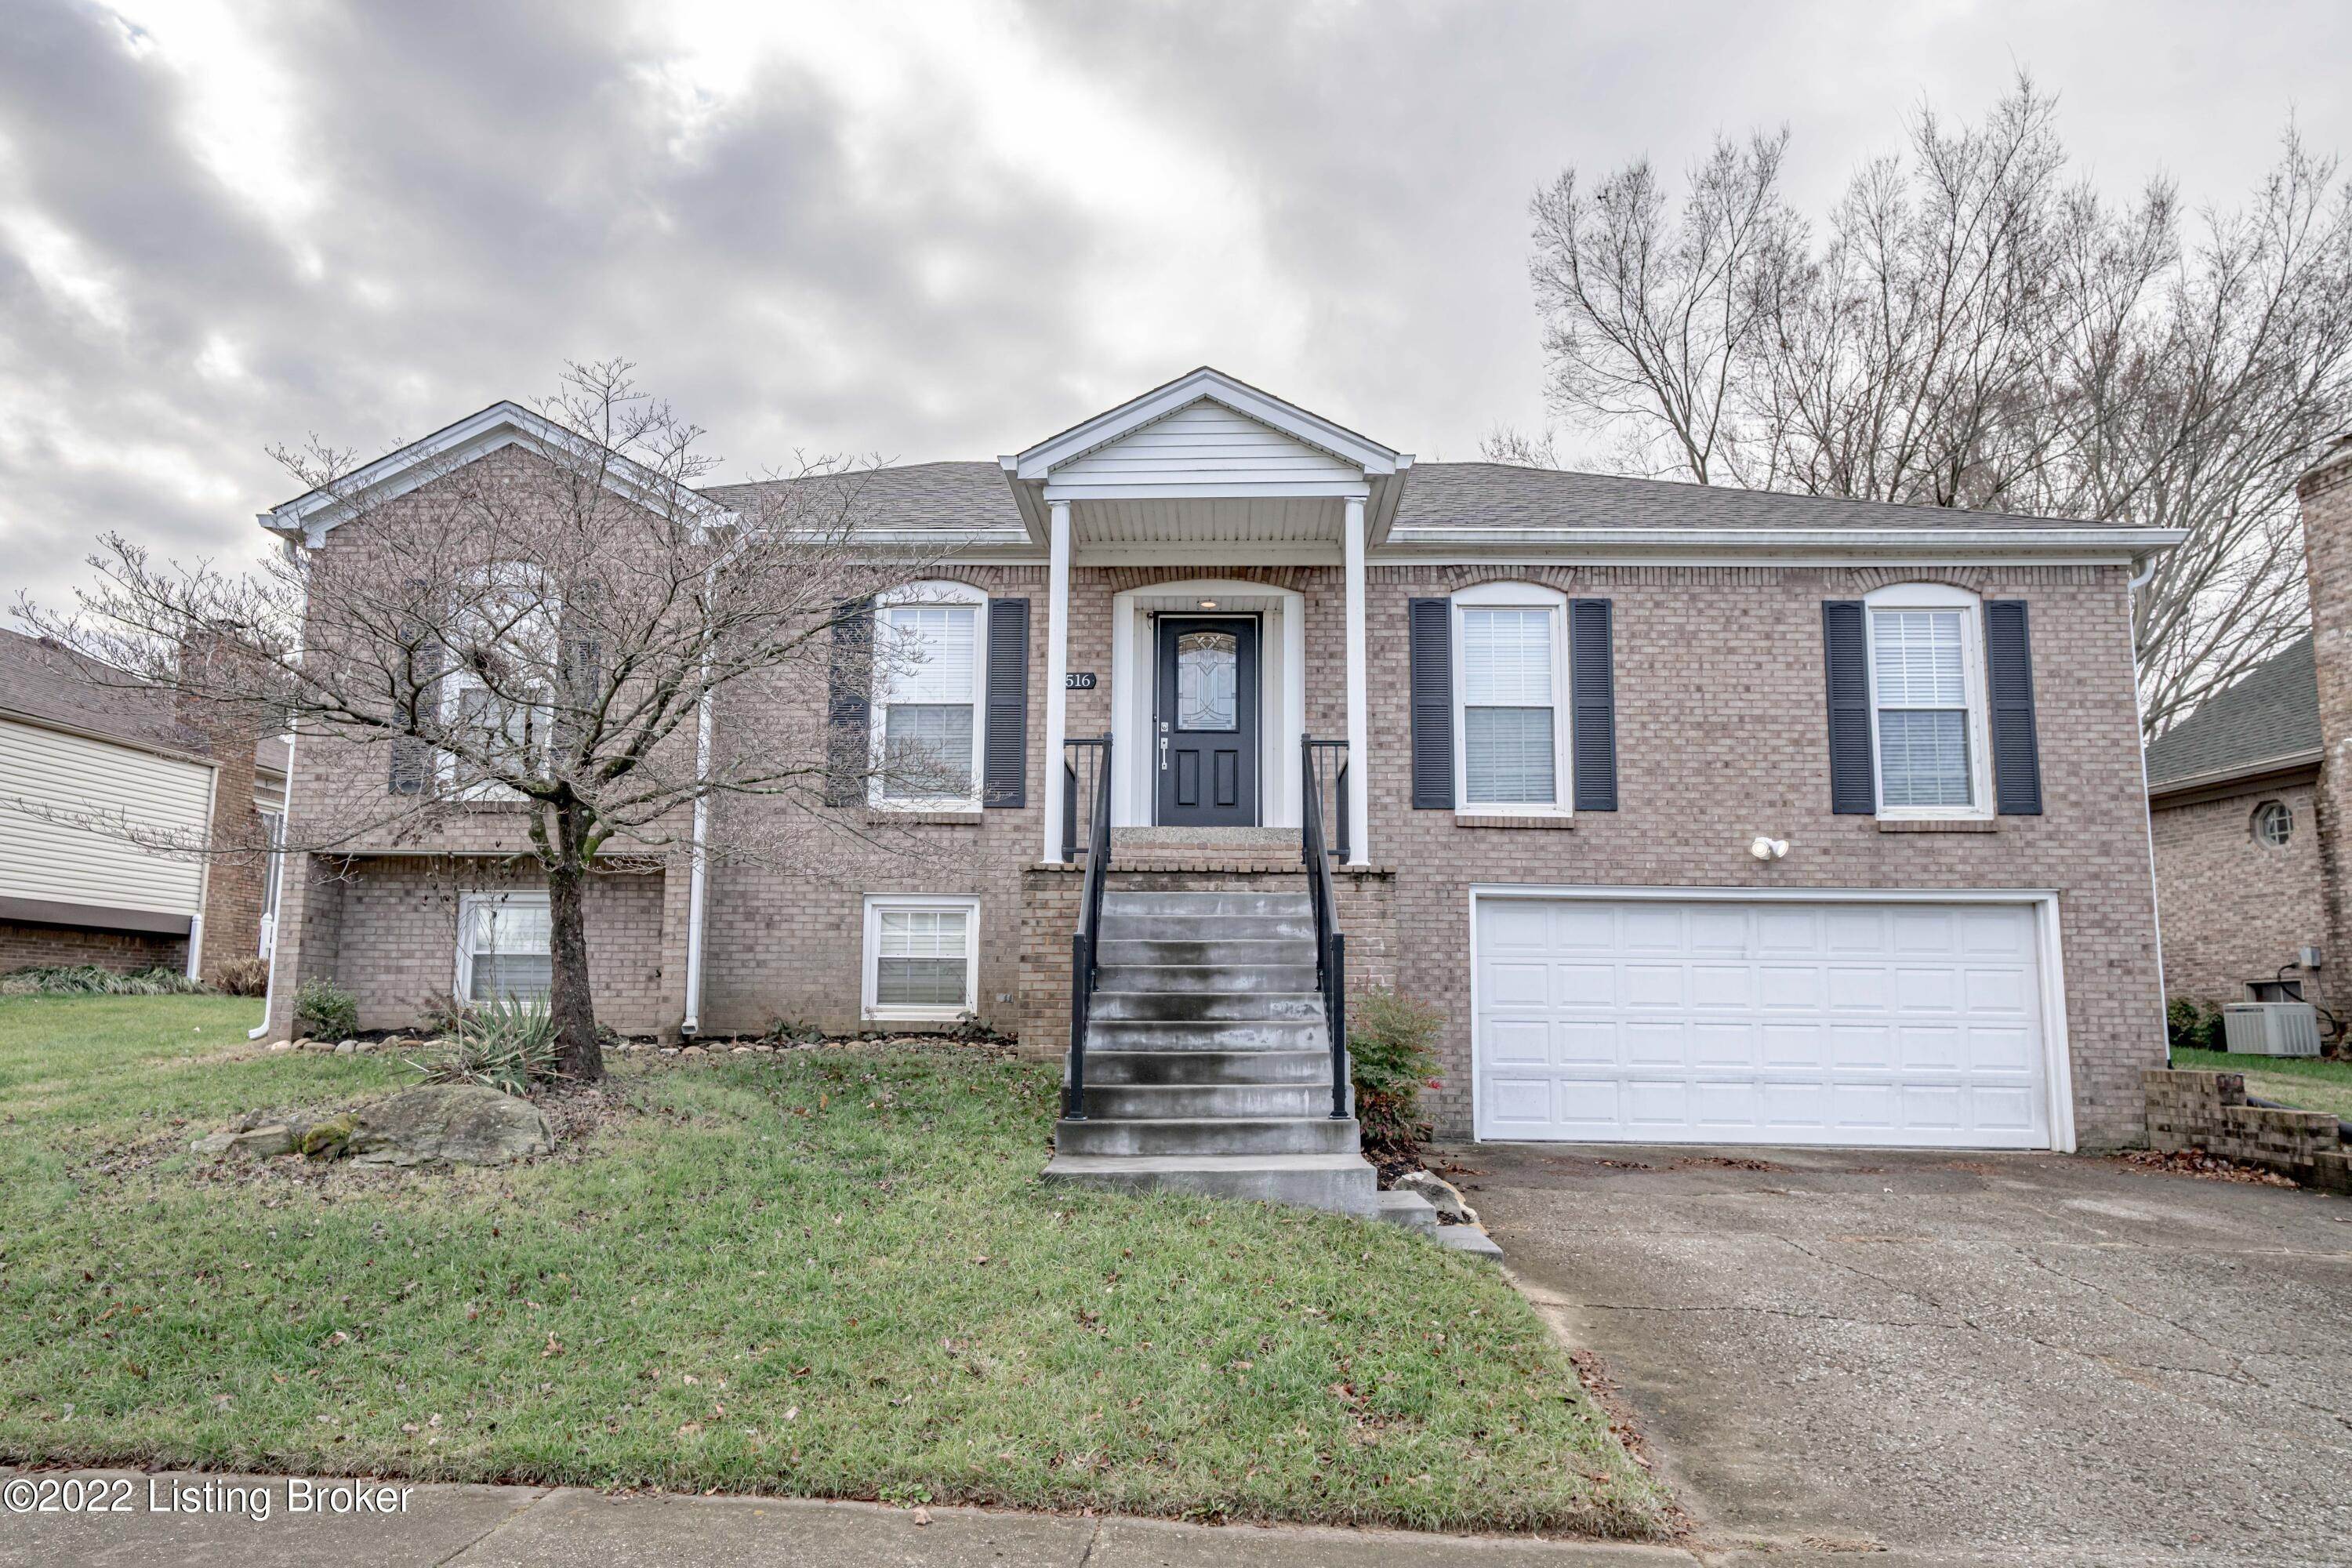 1. Single Family at Louisville, KY 40220